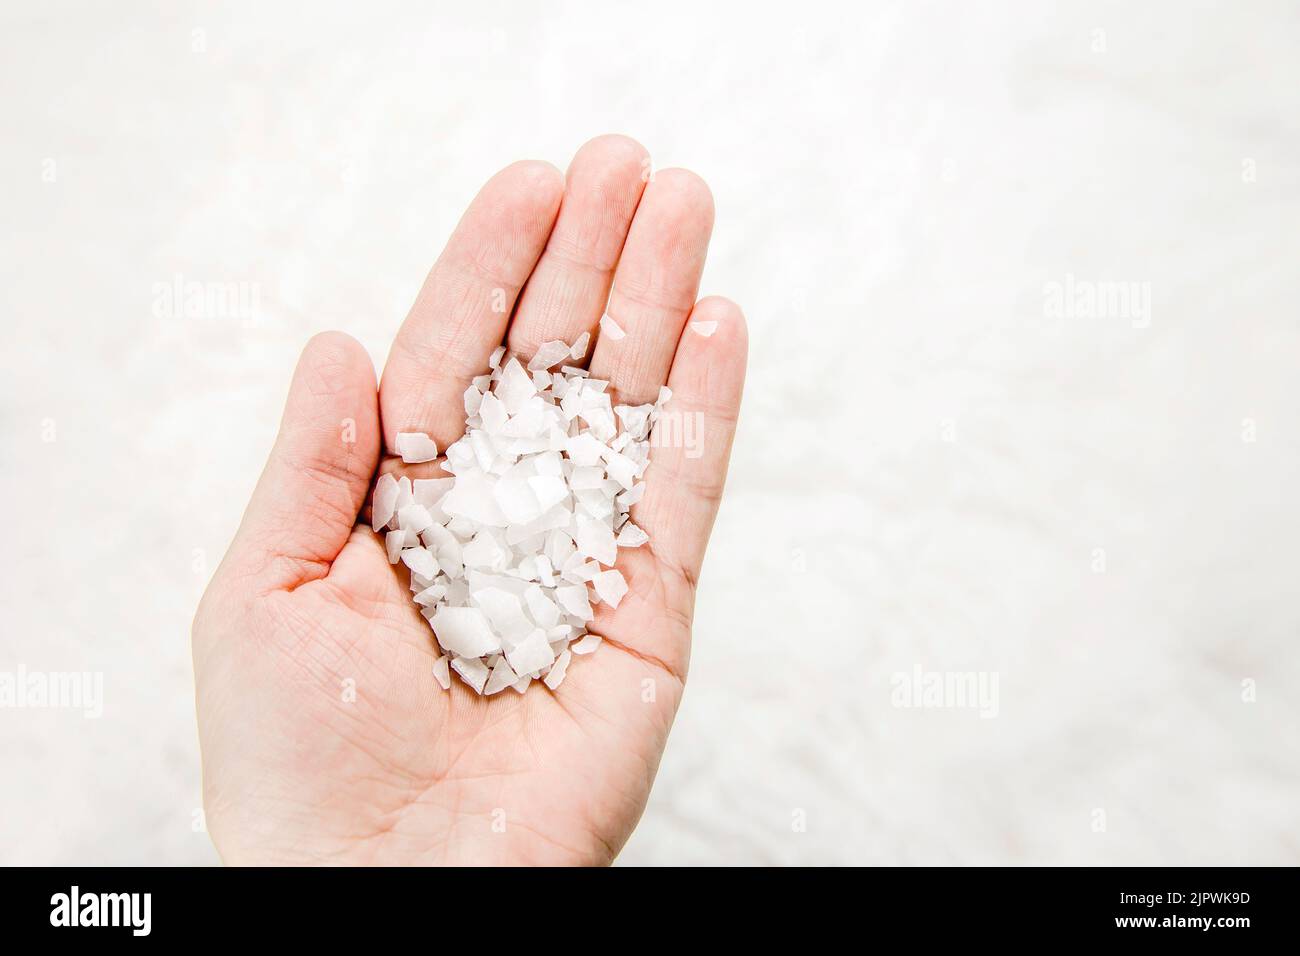 Close up view of person hand holding Magnesium Chloride vitamin salt flakes in palm, white minimal background, lot of copy space. Stock Photo